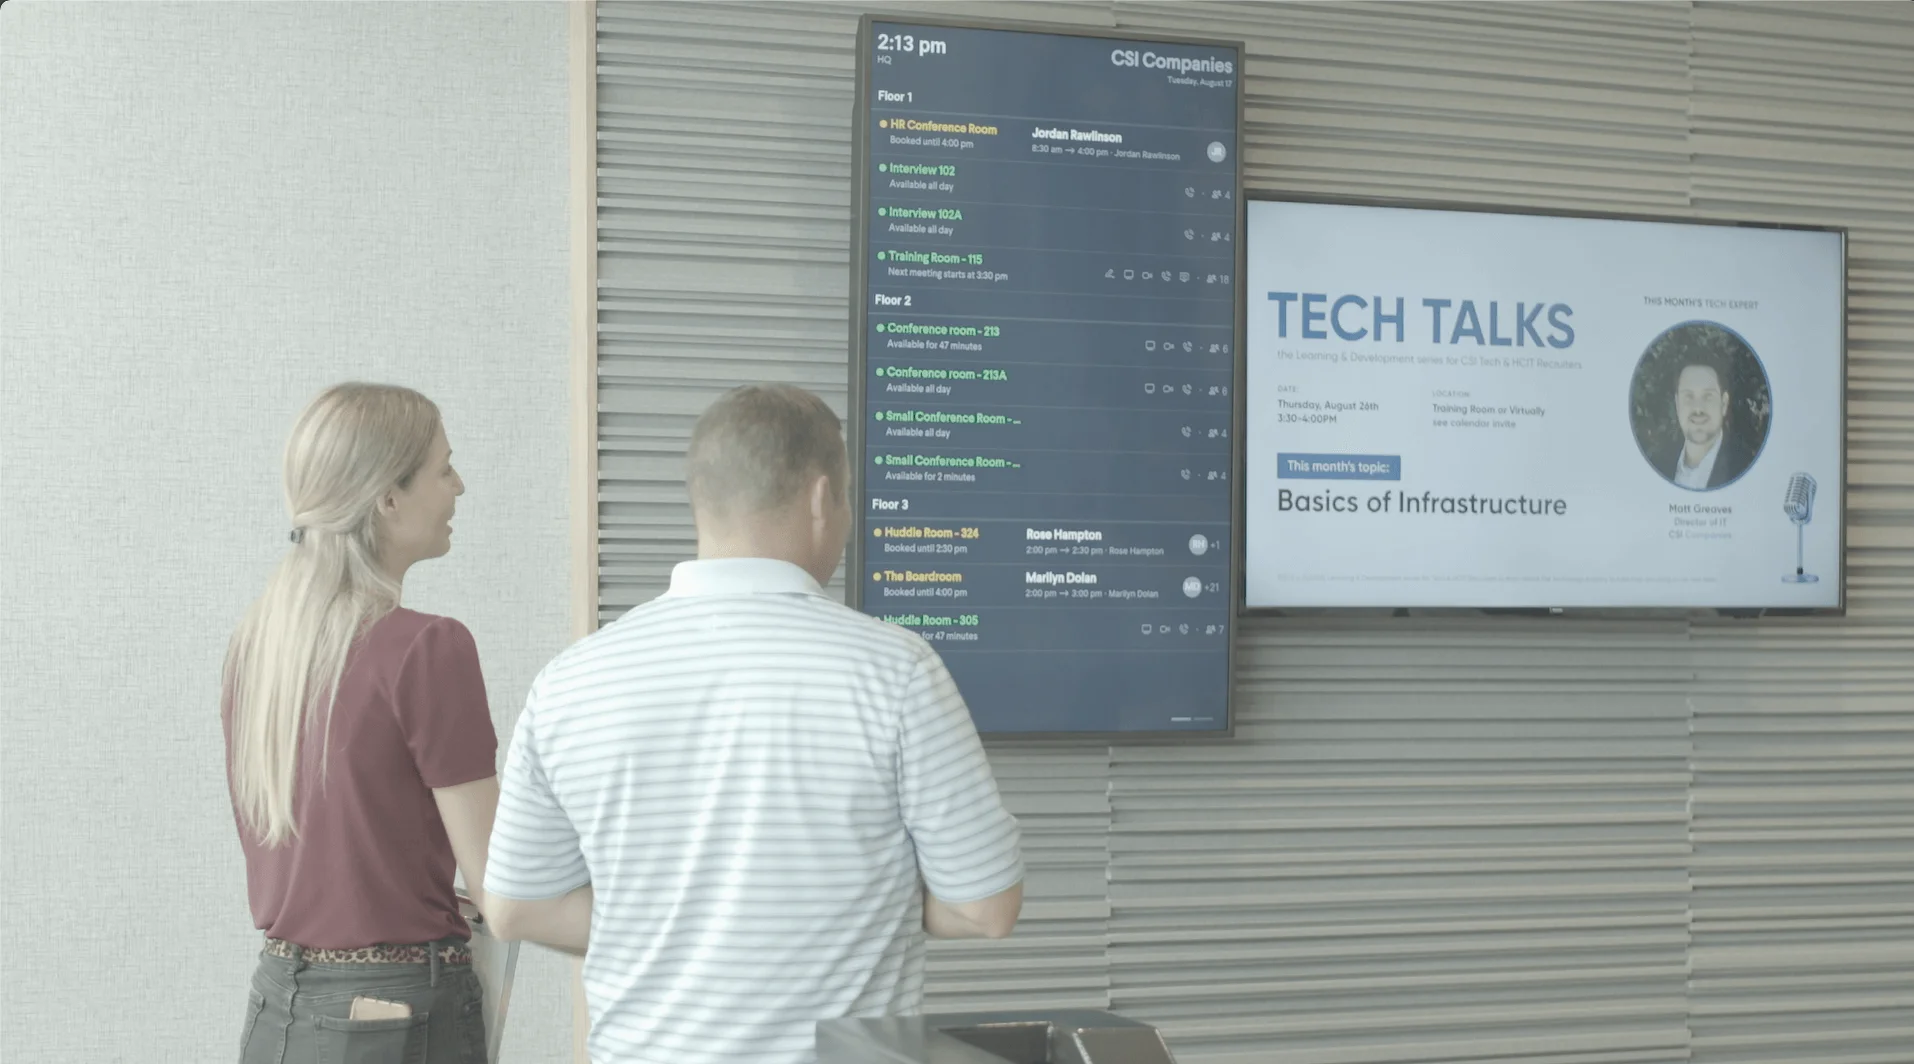 Interactive Wayfinding: Enhancing Visitor Experience with Digital Signage